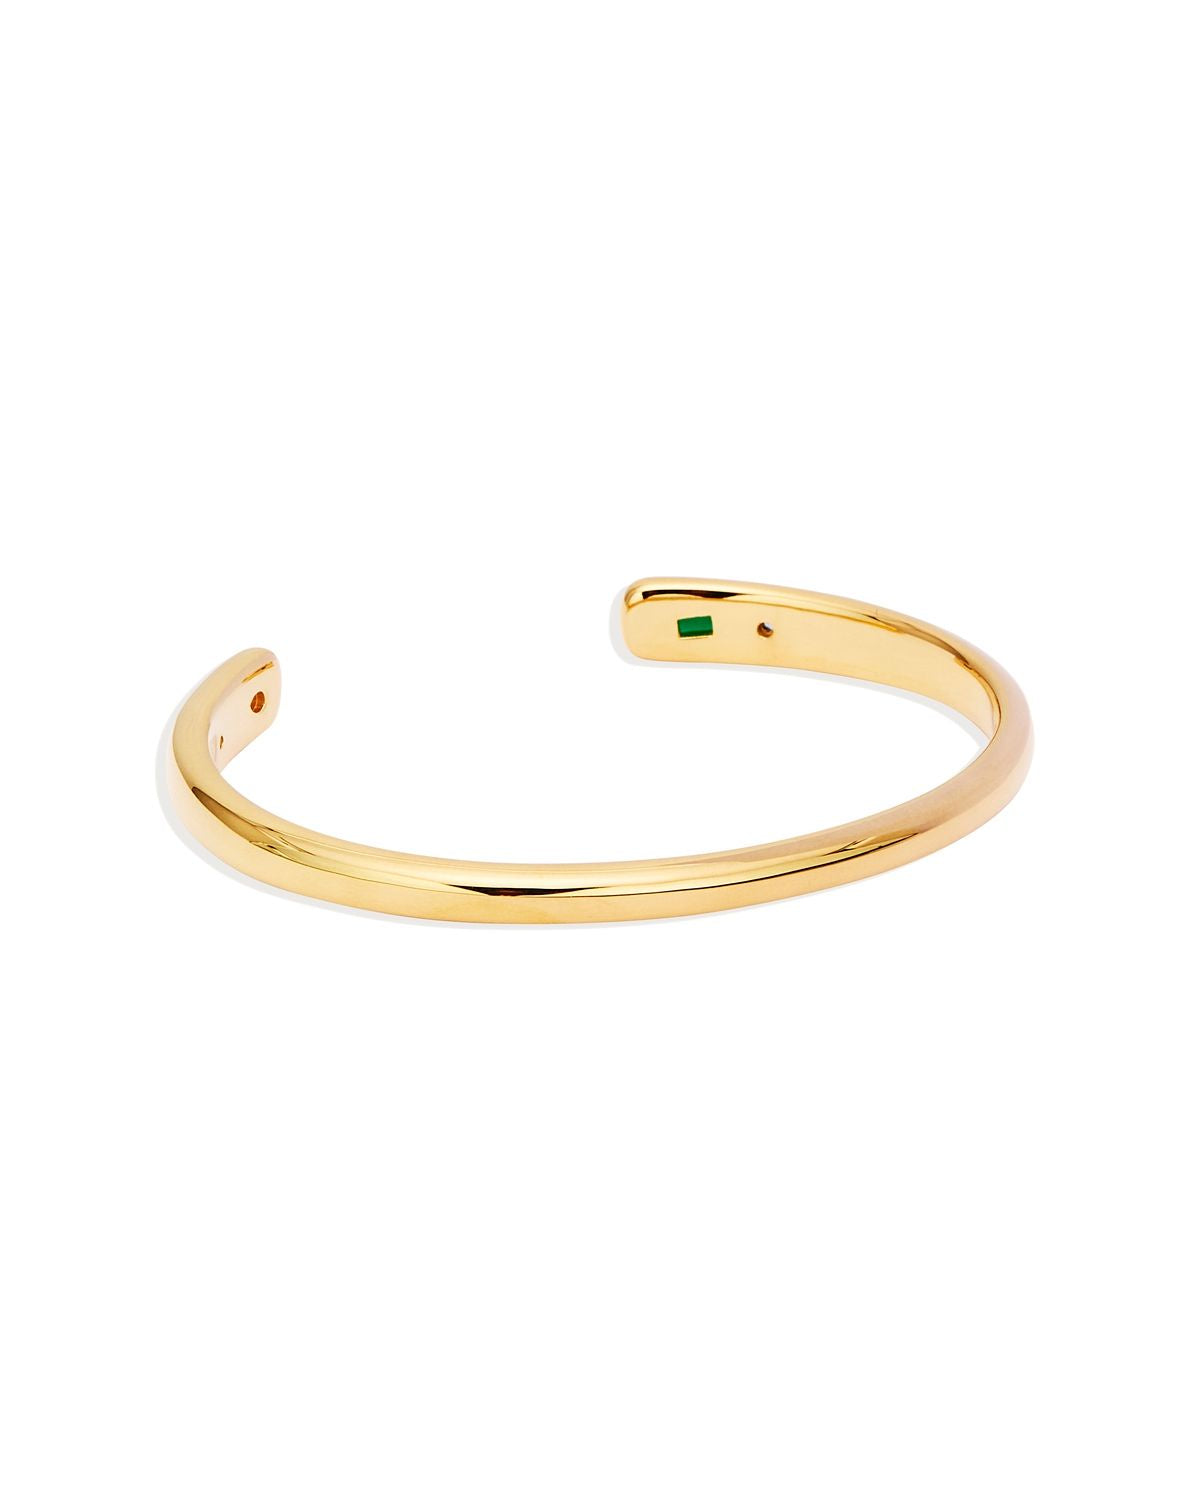 CONNECT TO THE UNIVERSE CUFF - 18K GOLD VERMEIL - BY CHARLOTTE